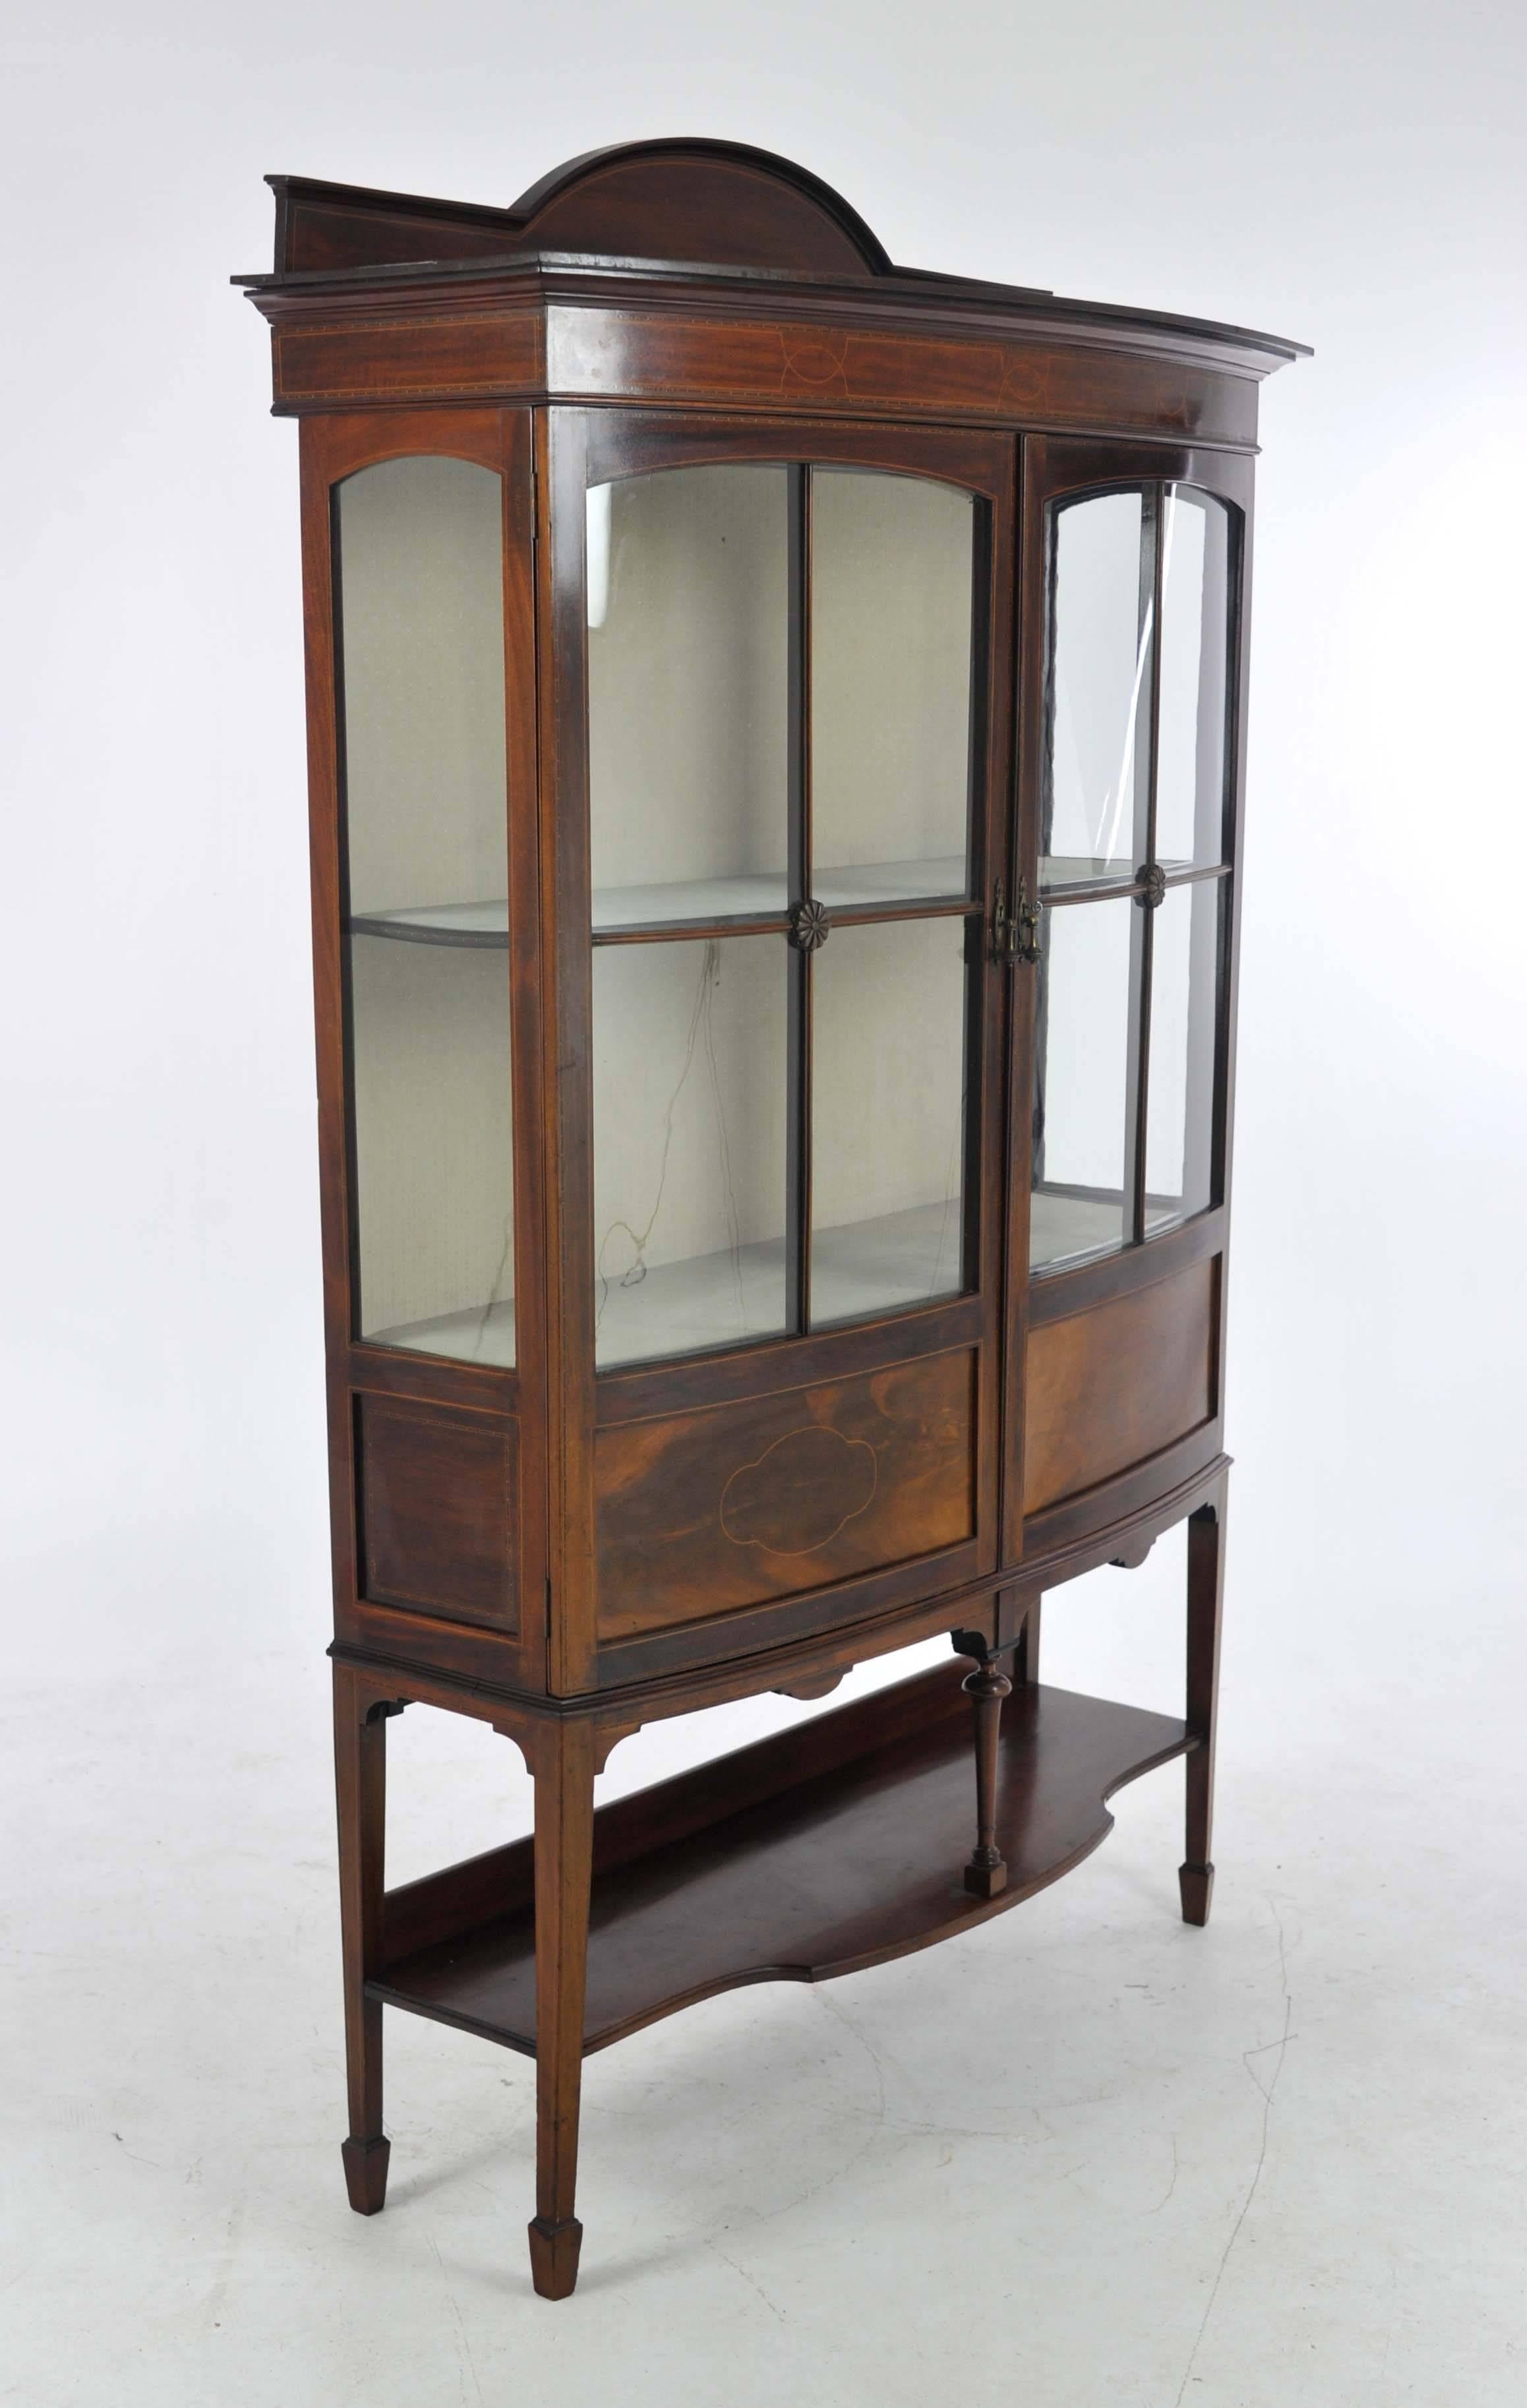 Early 20th Century Antique China Cabinet, Inlaid Walnut, Bow Front Cabinet, Scotland, 1910